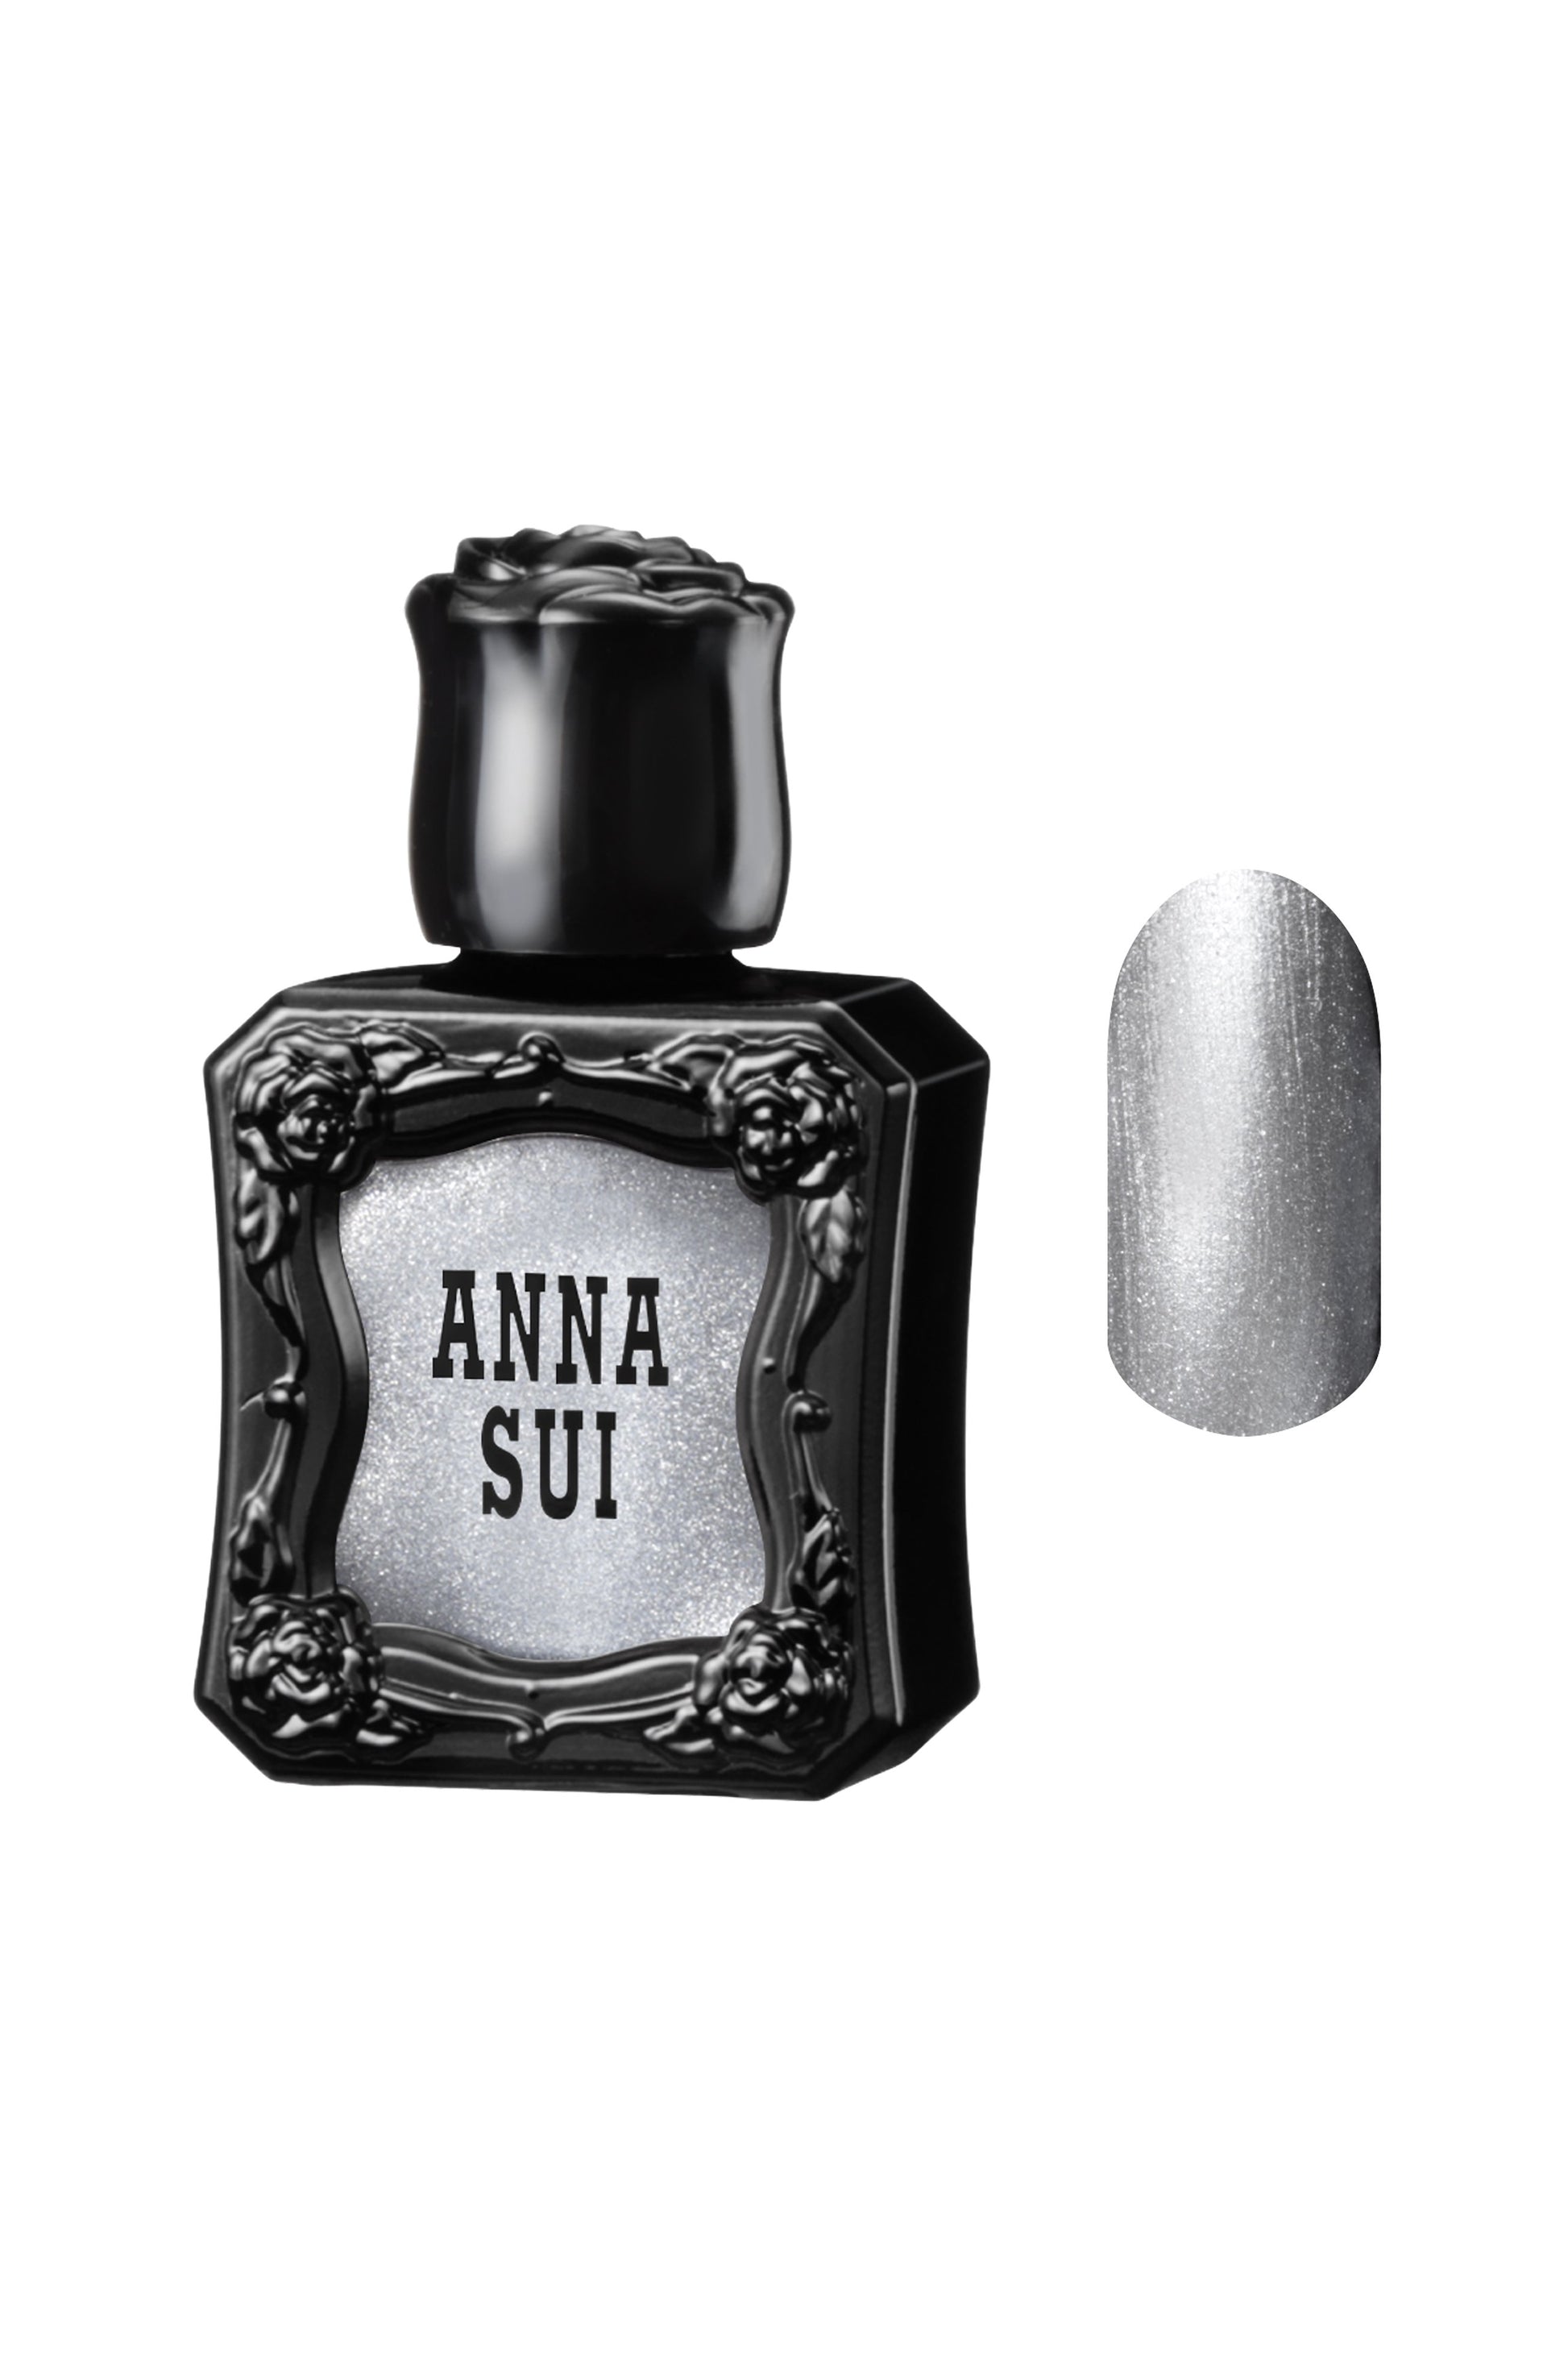 METALLIC SILVER Nail Polish bottle raised rose pattern, Anna Sui in black over nail colors in front